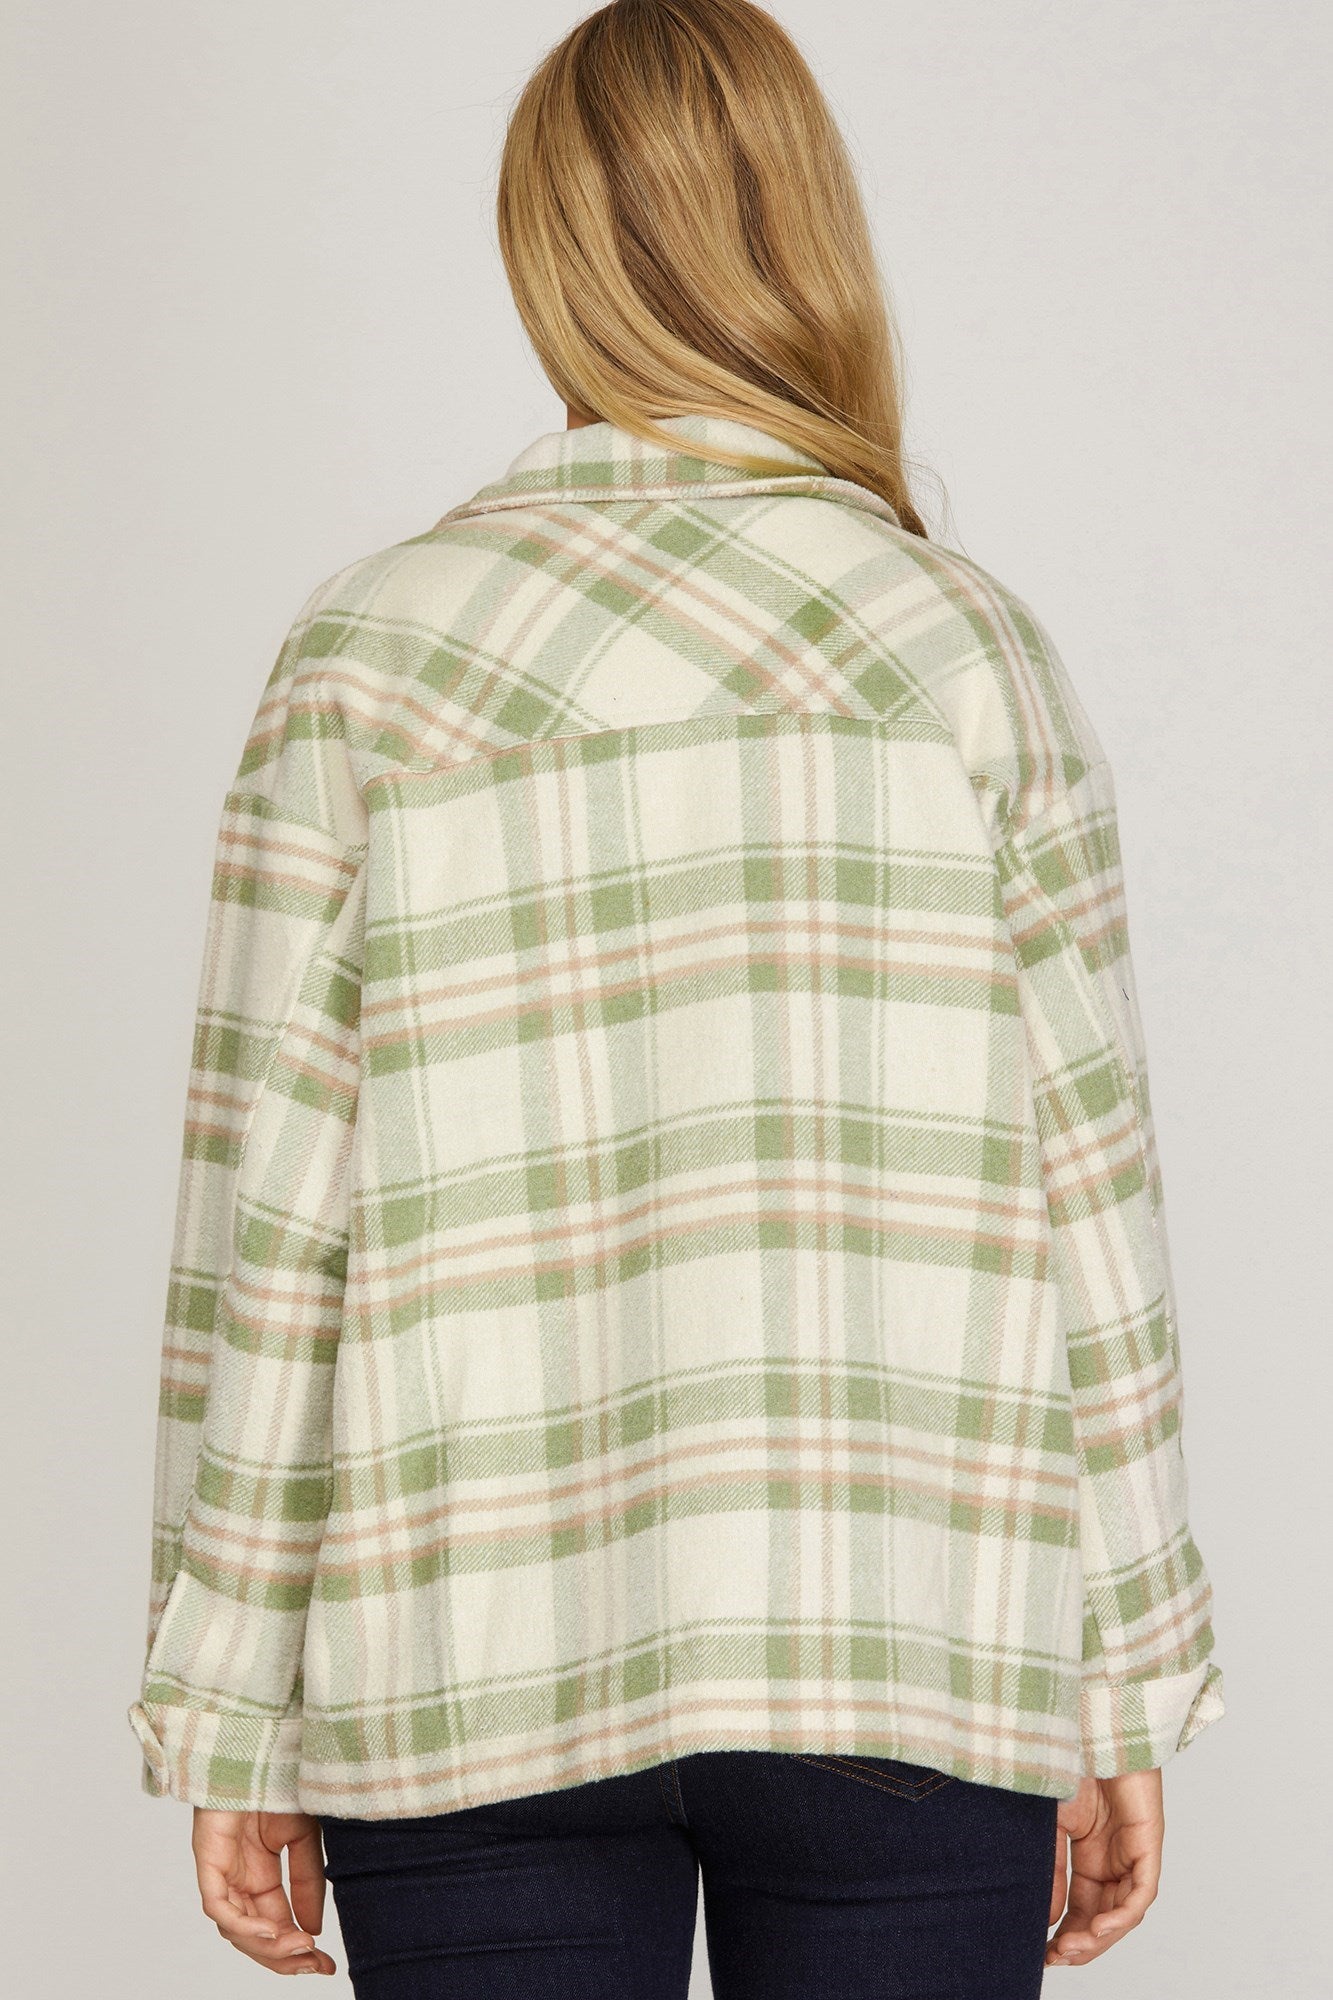 SHE AND SKY Women's Outerwear Brushed Plaid Flap Pocket Shacket || David's Clothing